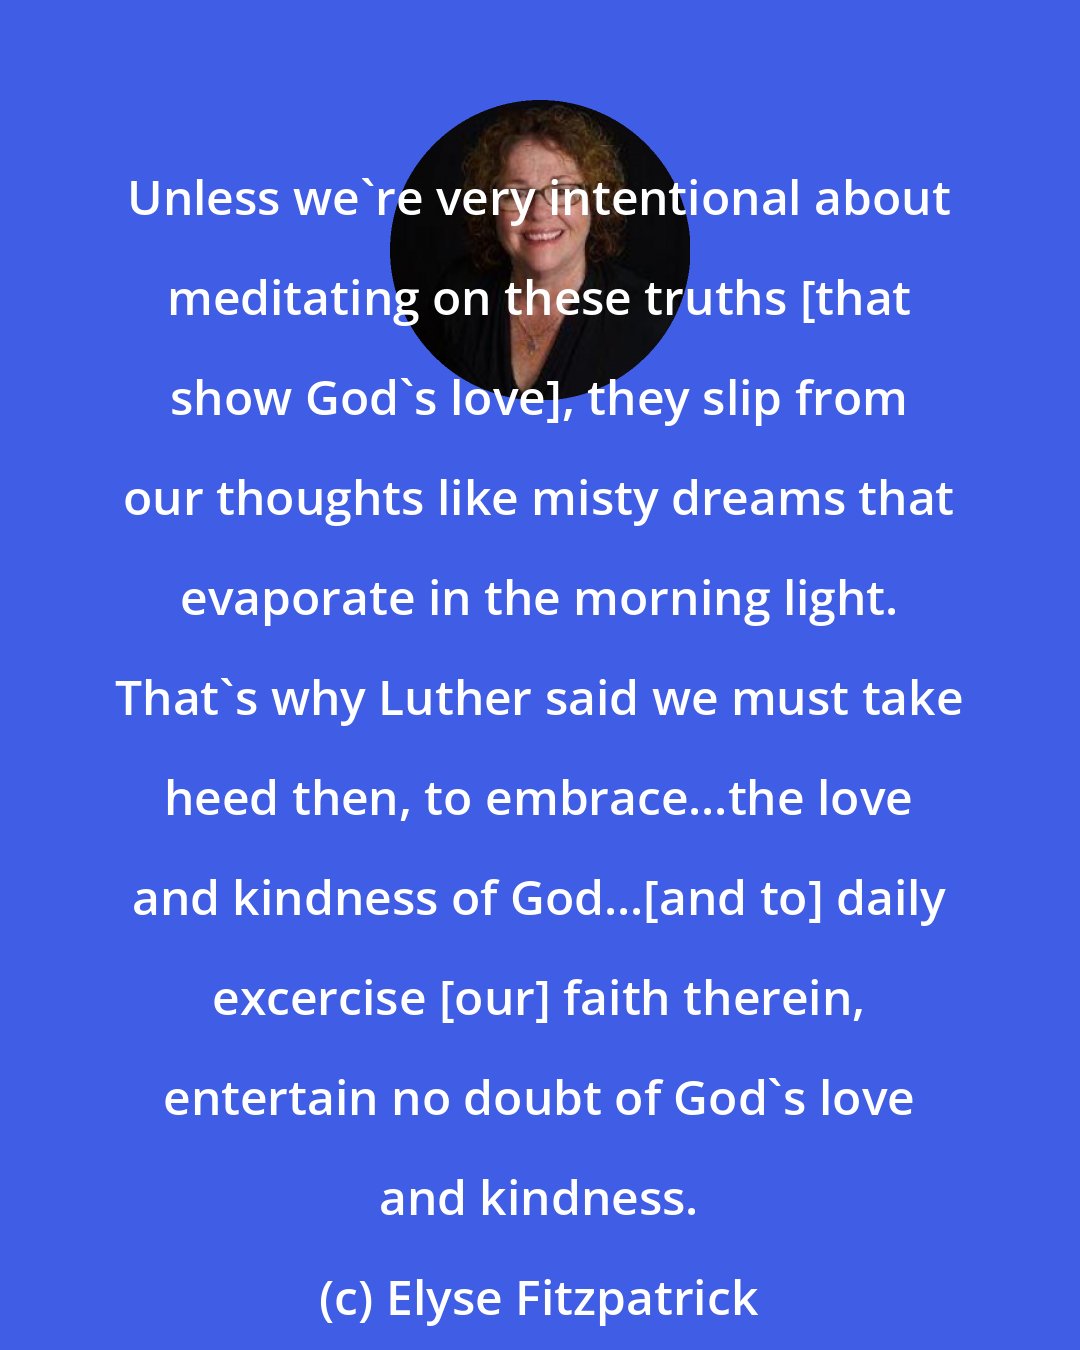 Elyse Fitzpatrick: Unless we're very intentional about meditating on these truths [that show God's love], they slip from our thoughts like misty dreams that evaporate in the morning light. That's why Luther said we must take heed then, to embrace...the love and kindness of God...[and to] daily excercise [our] faith therein, entertain no doubt of God's love and kindness.